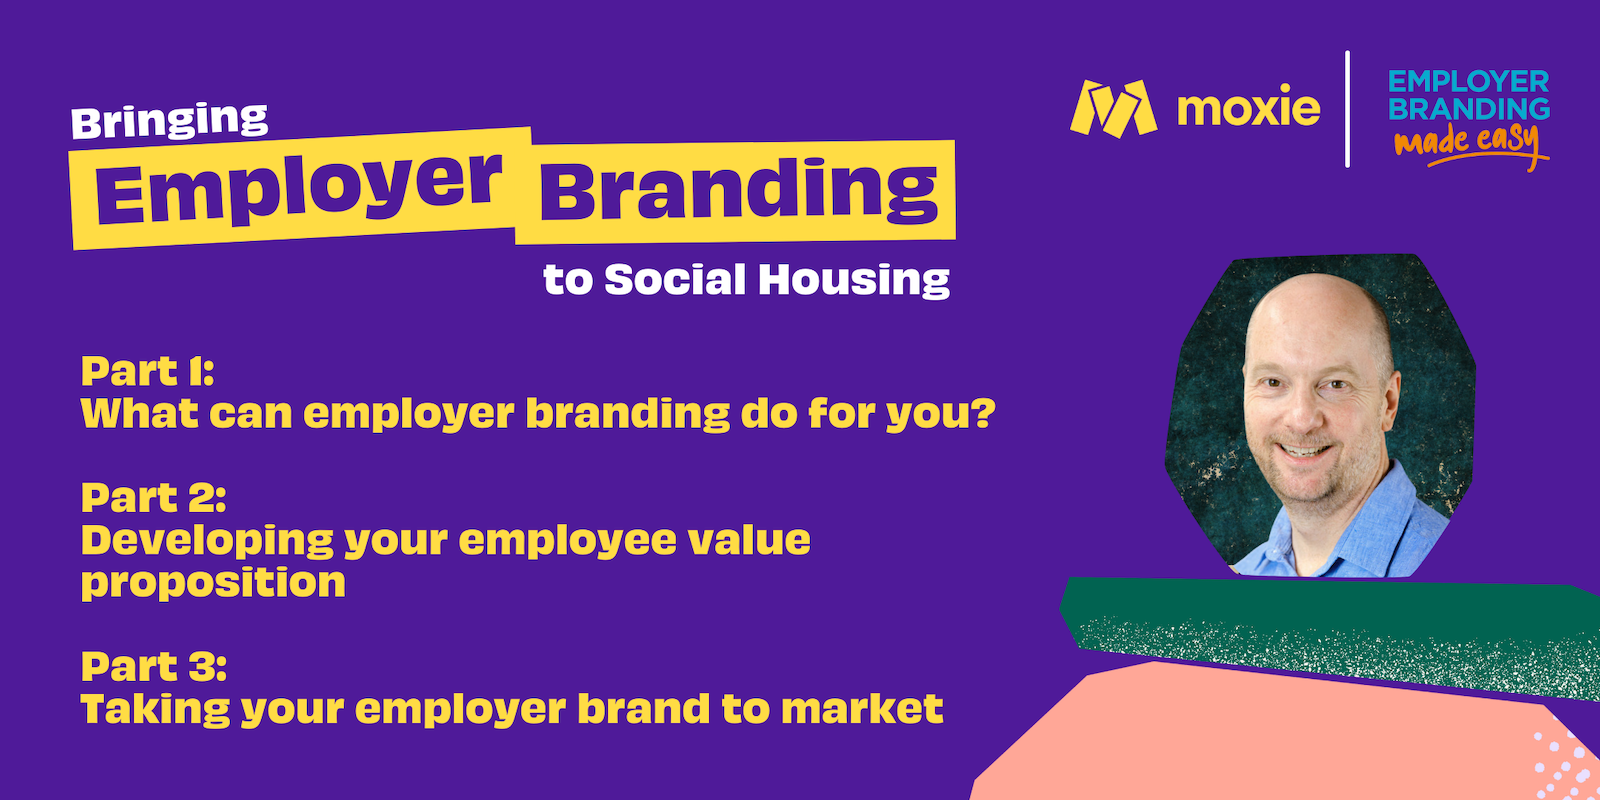 What can employer branding do for you